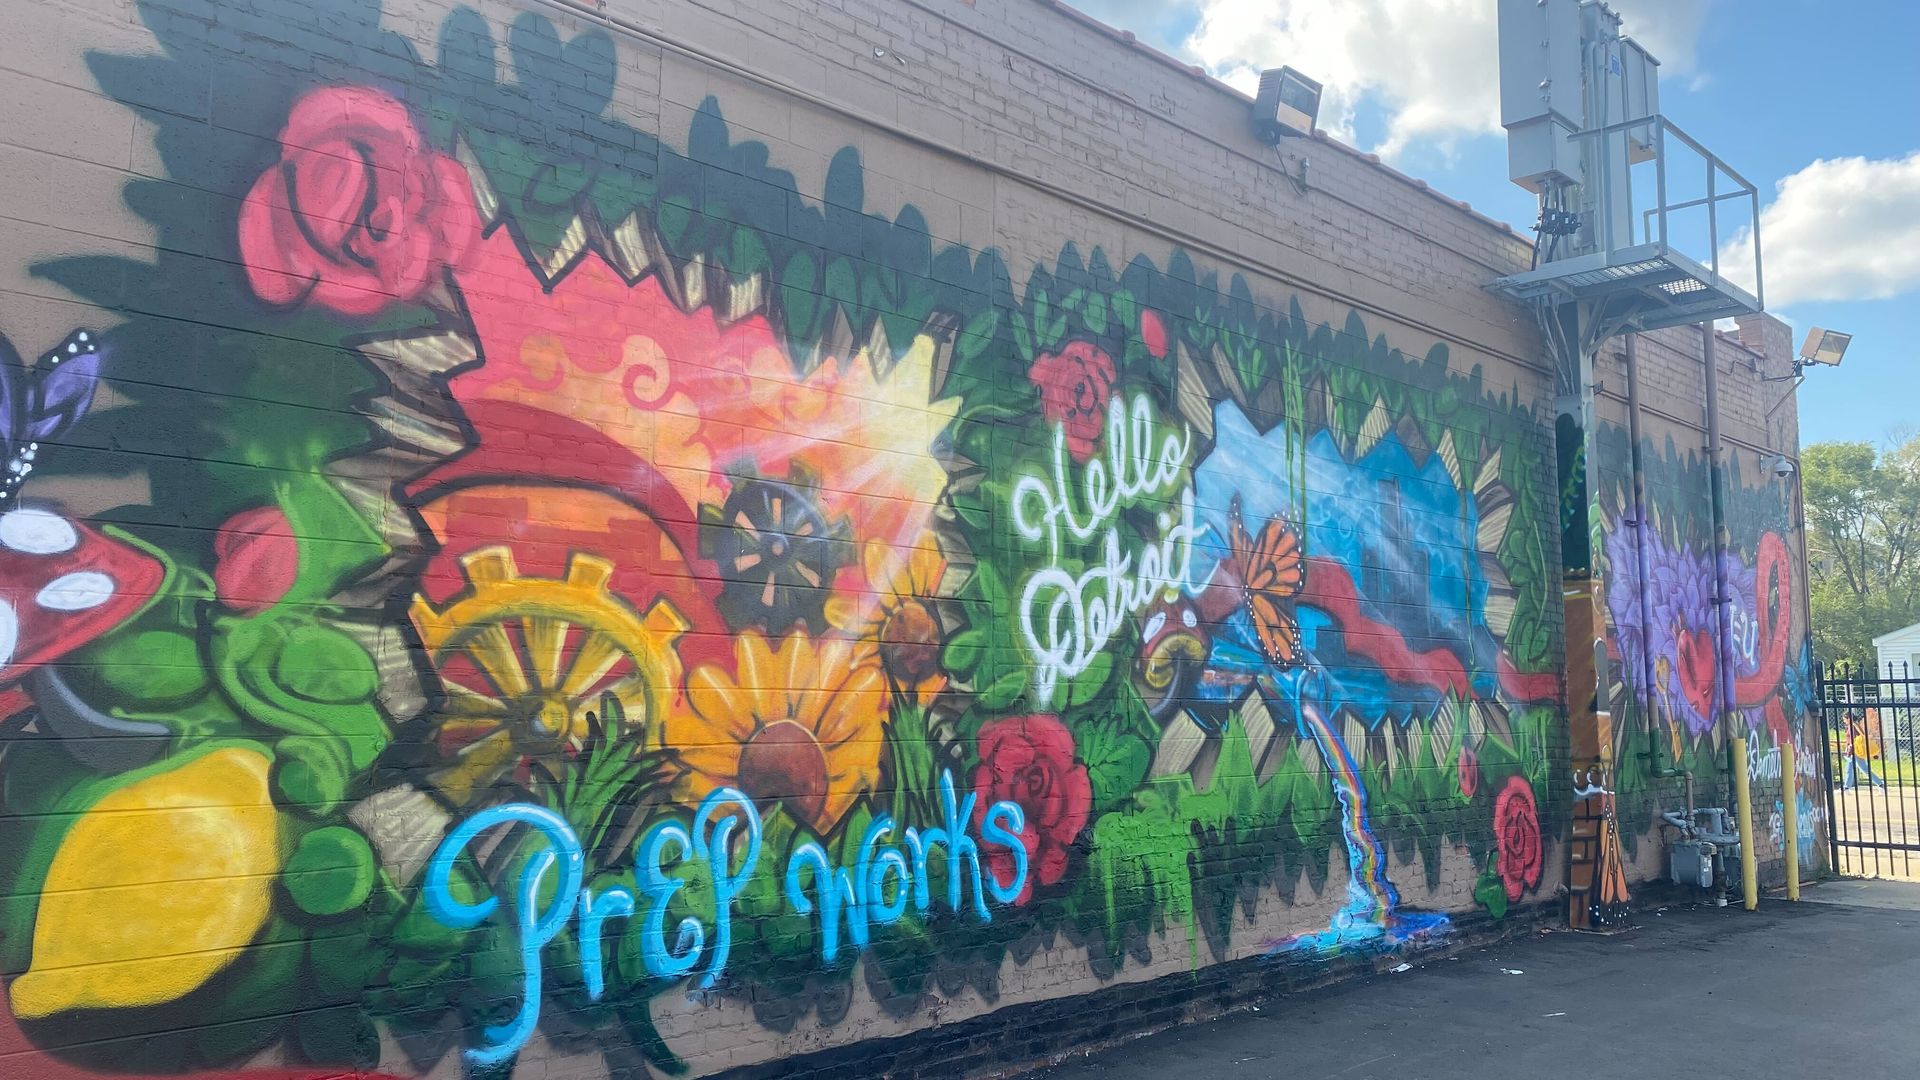 This mural in Detroit represents progress on the HIV epidemic